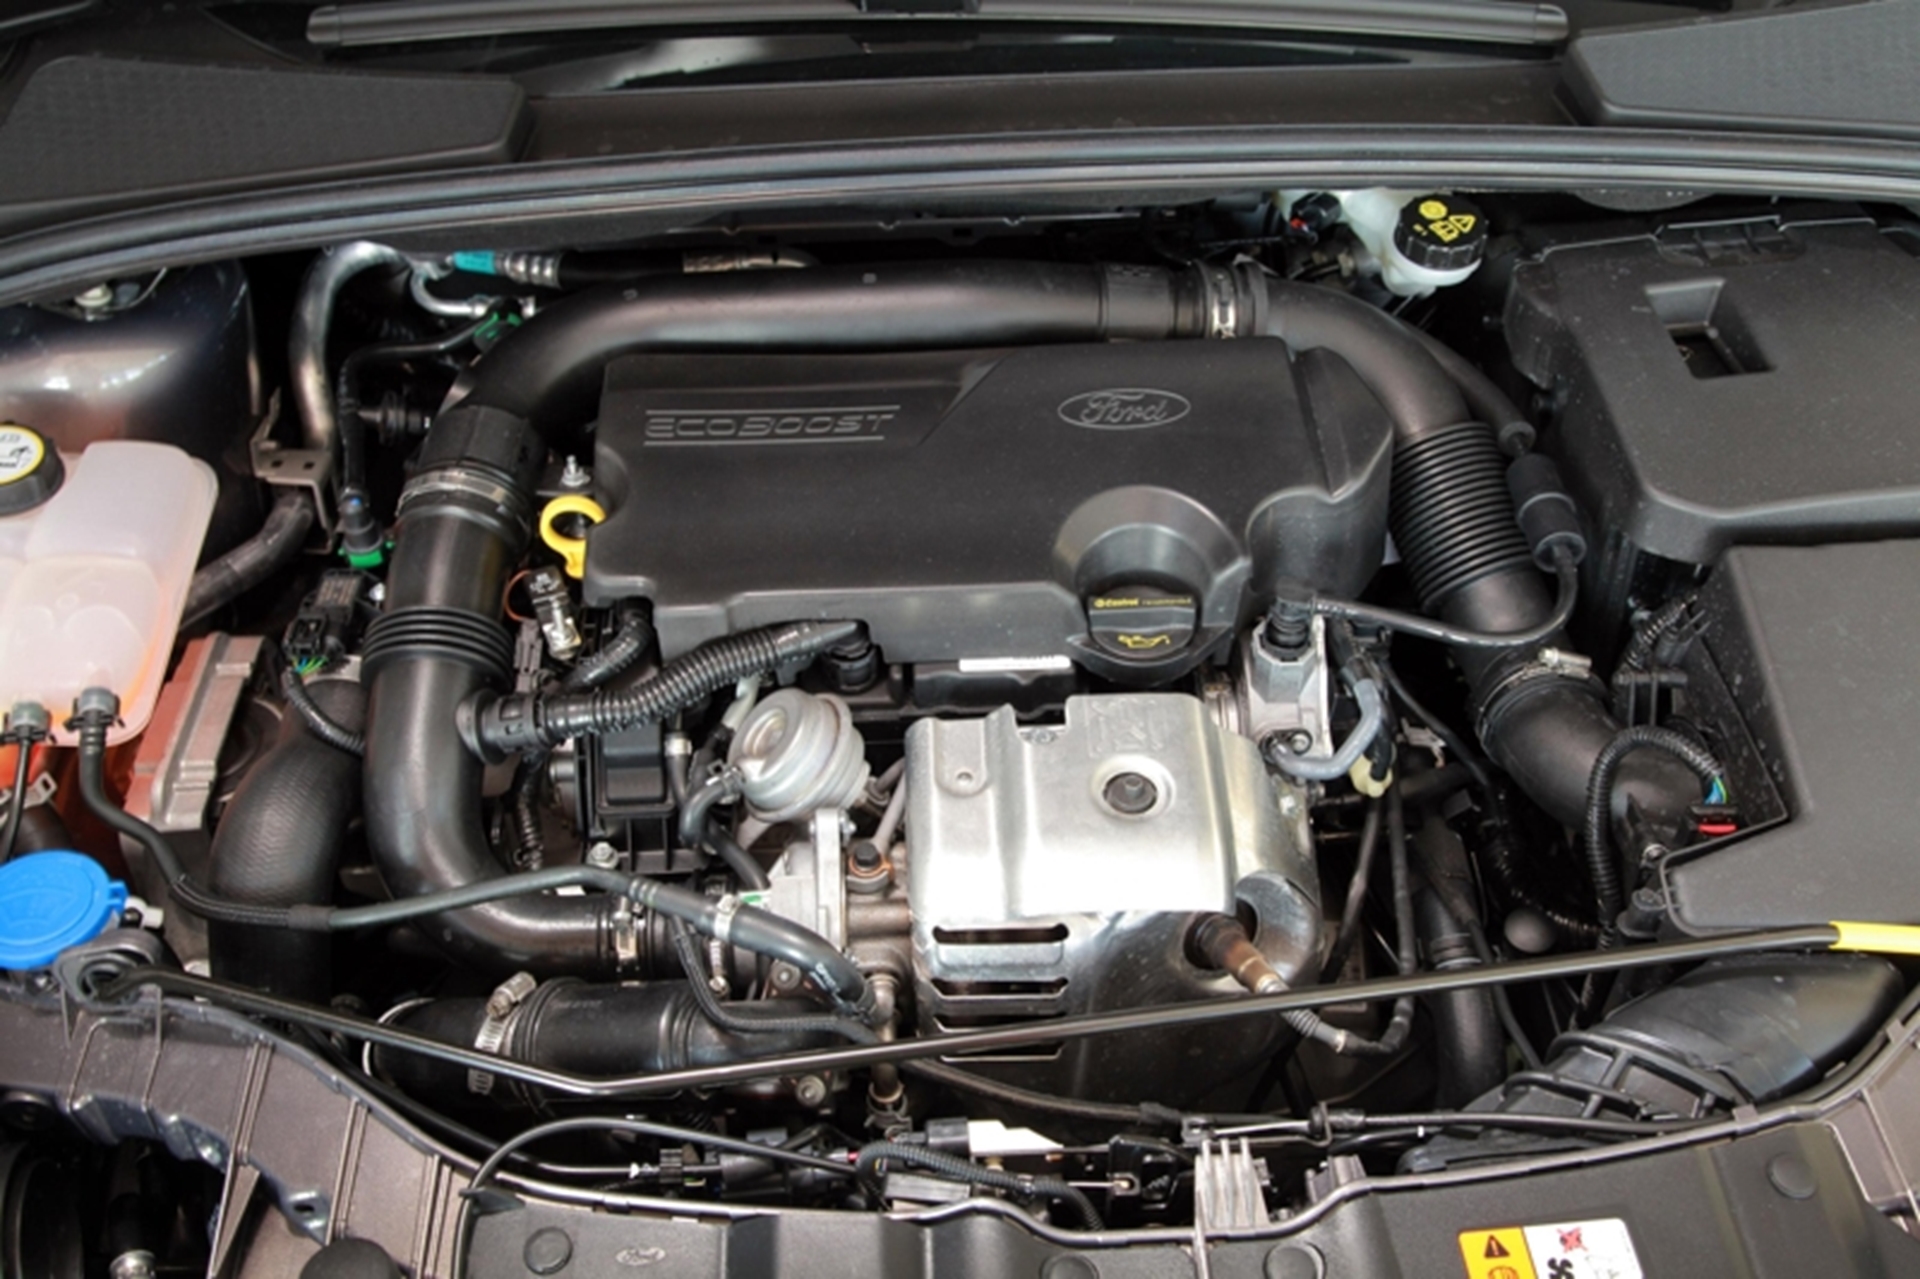 FORD NEW 1.0-LITRE ECOBOOST PETROL ENGINE POWERED BY MULTIPLE INNOVATIONS